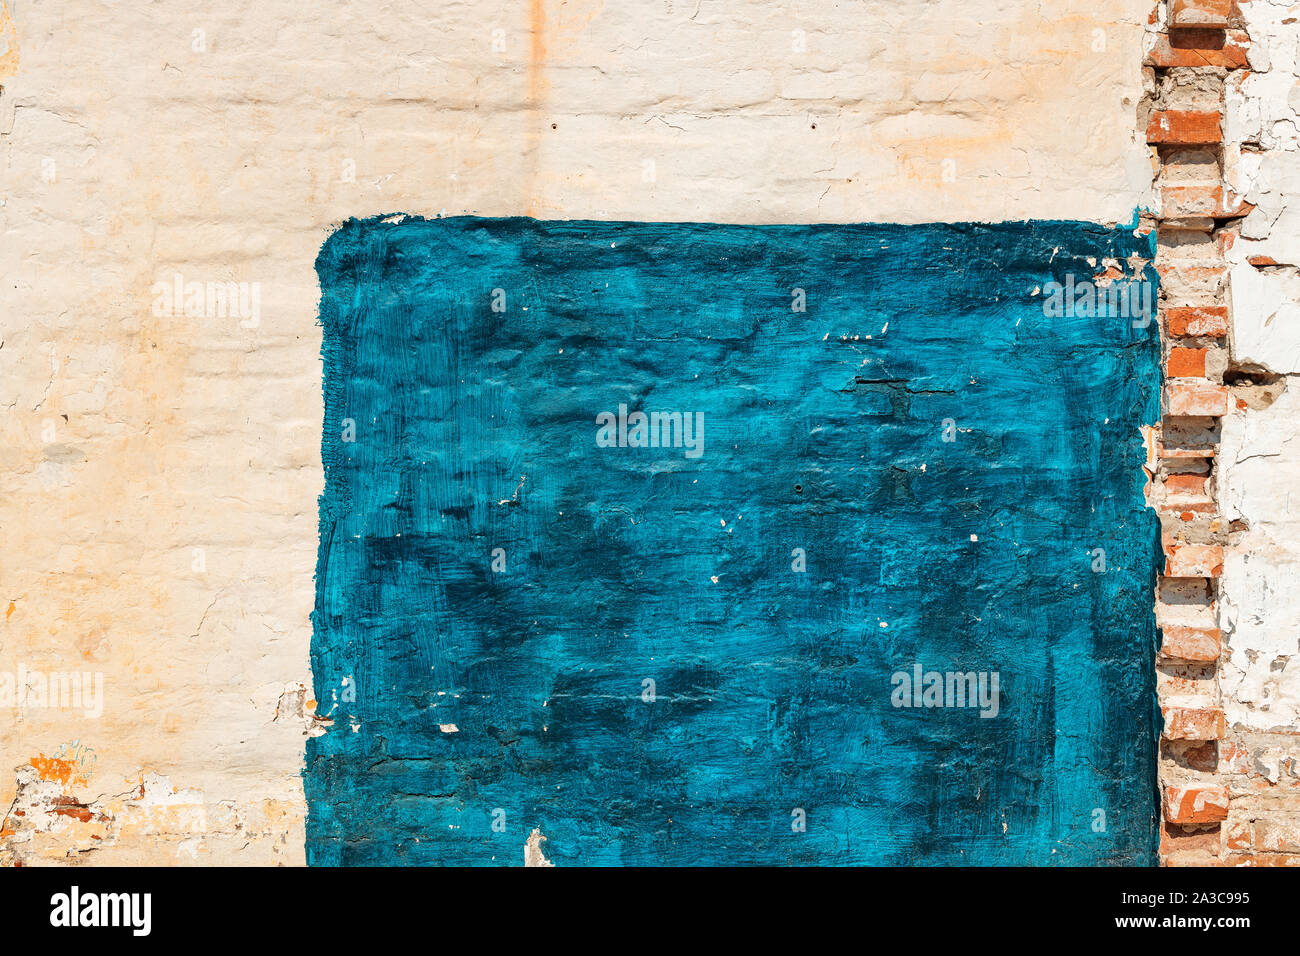 Grunge worn brickwall surface as background with rough texture Stock Photo